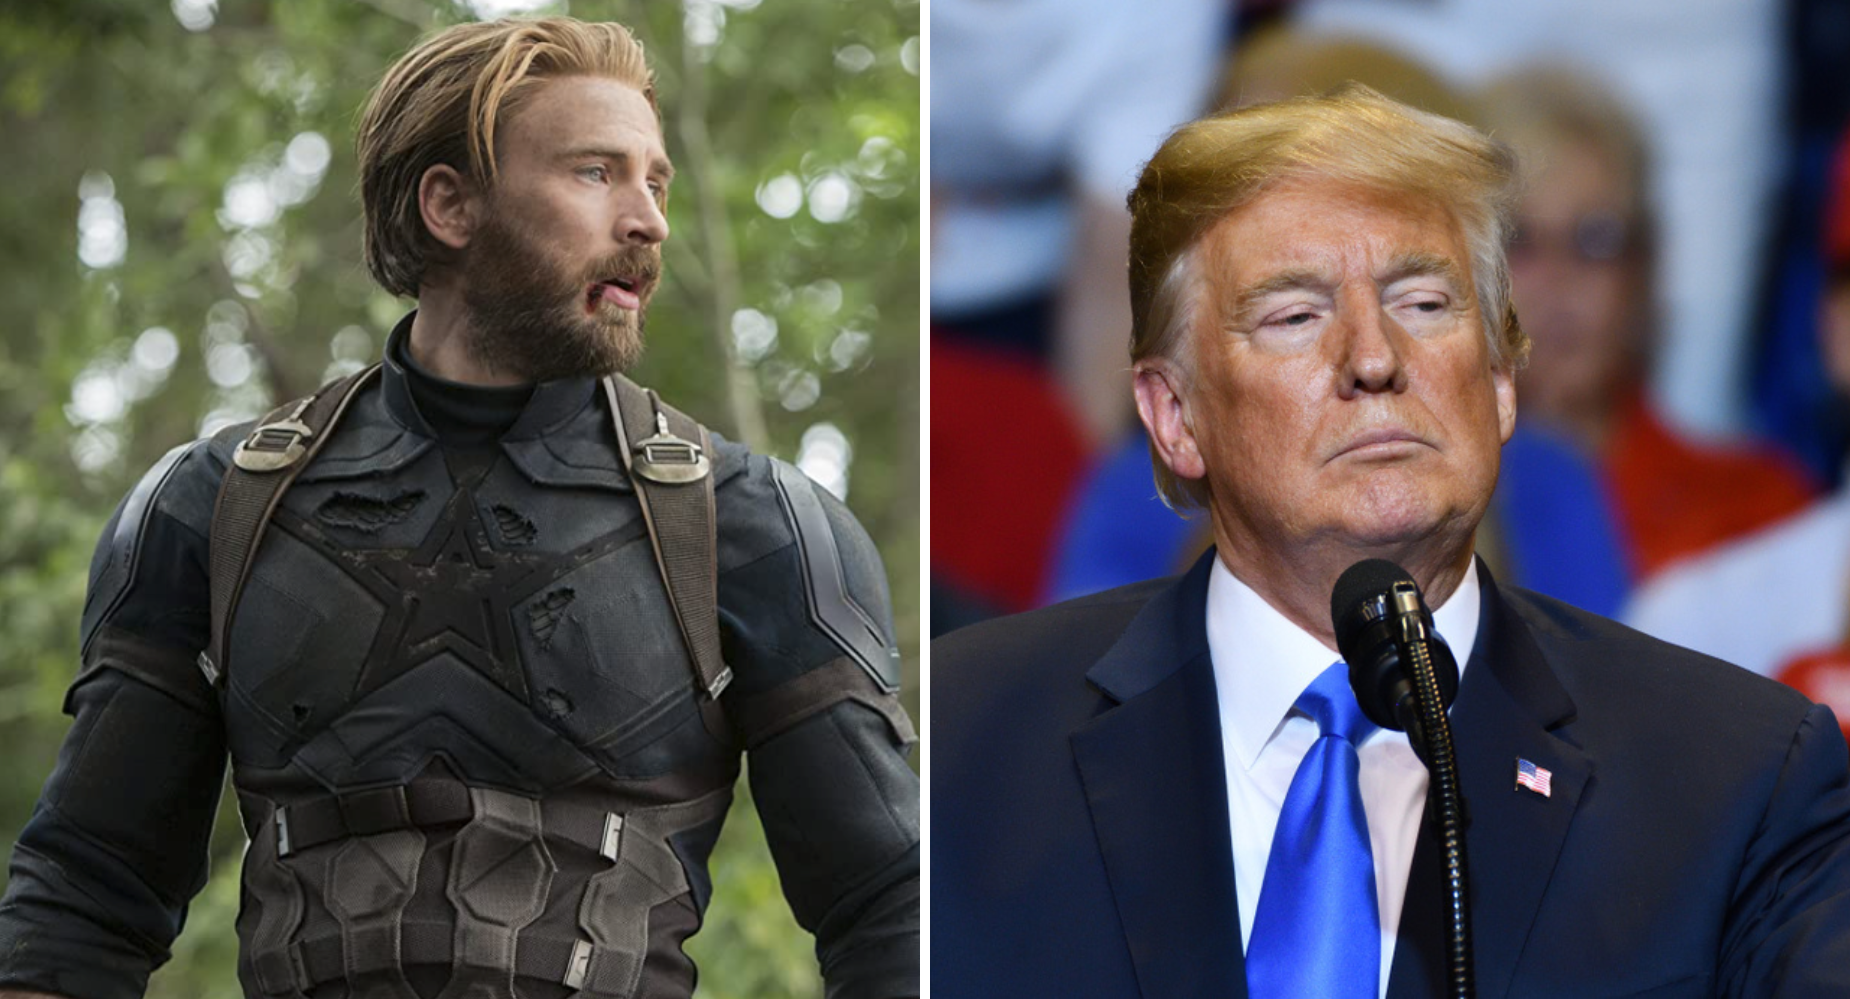 Captain America And Donald Trump Agree On Missing This iPhone Feature